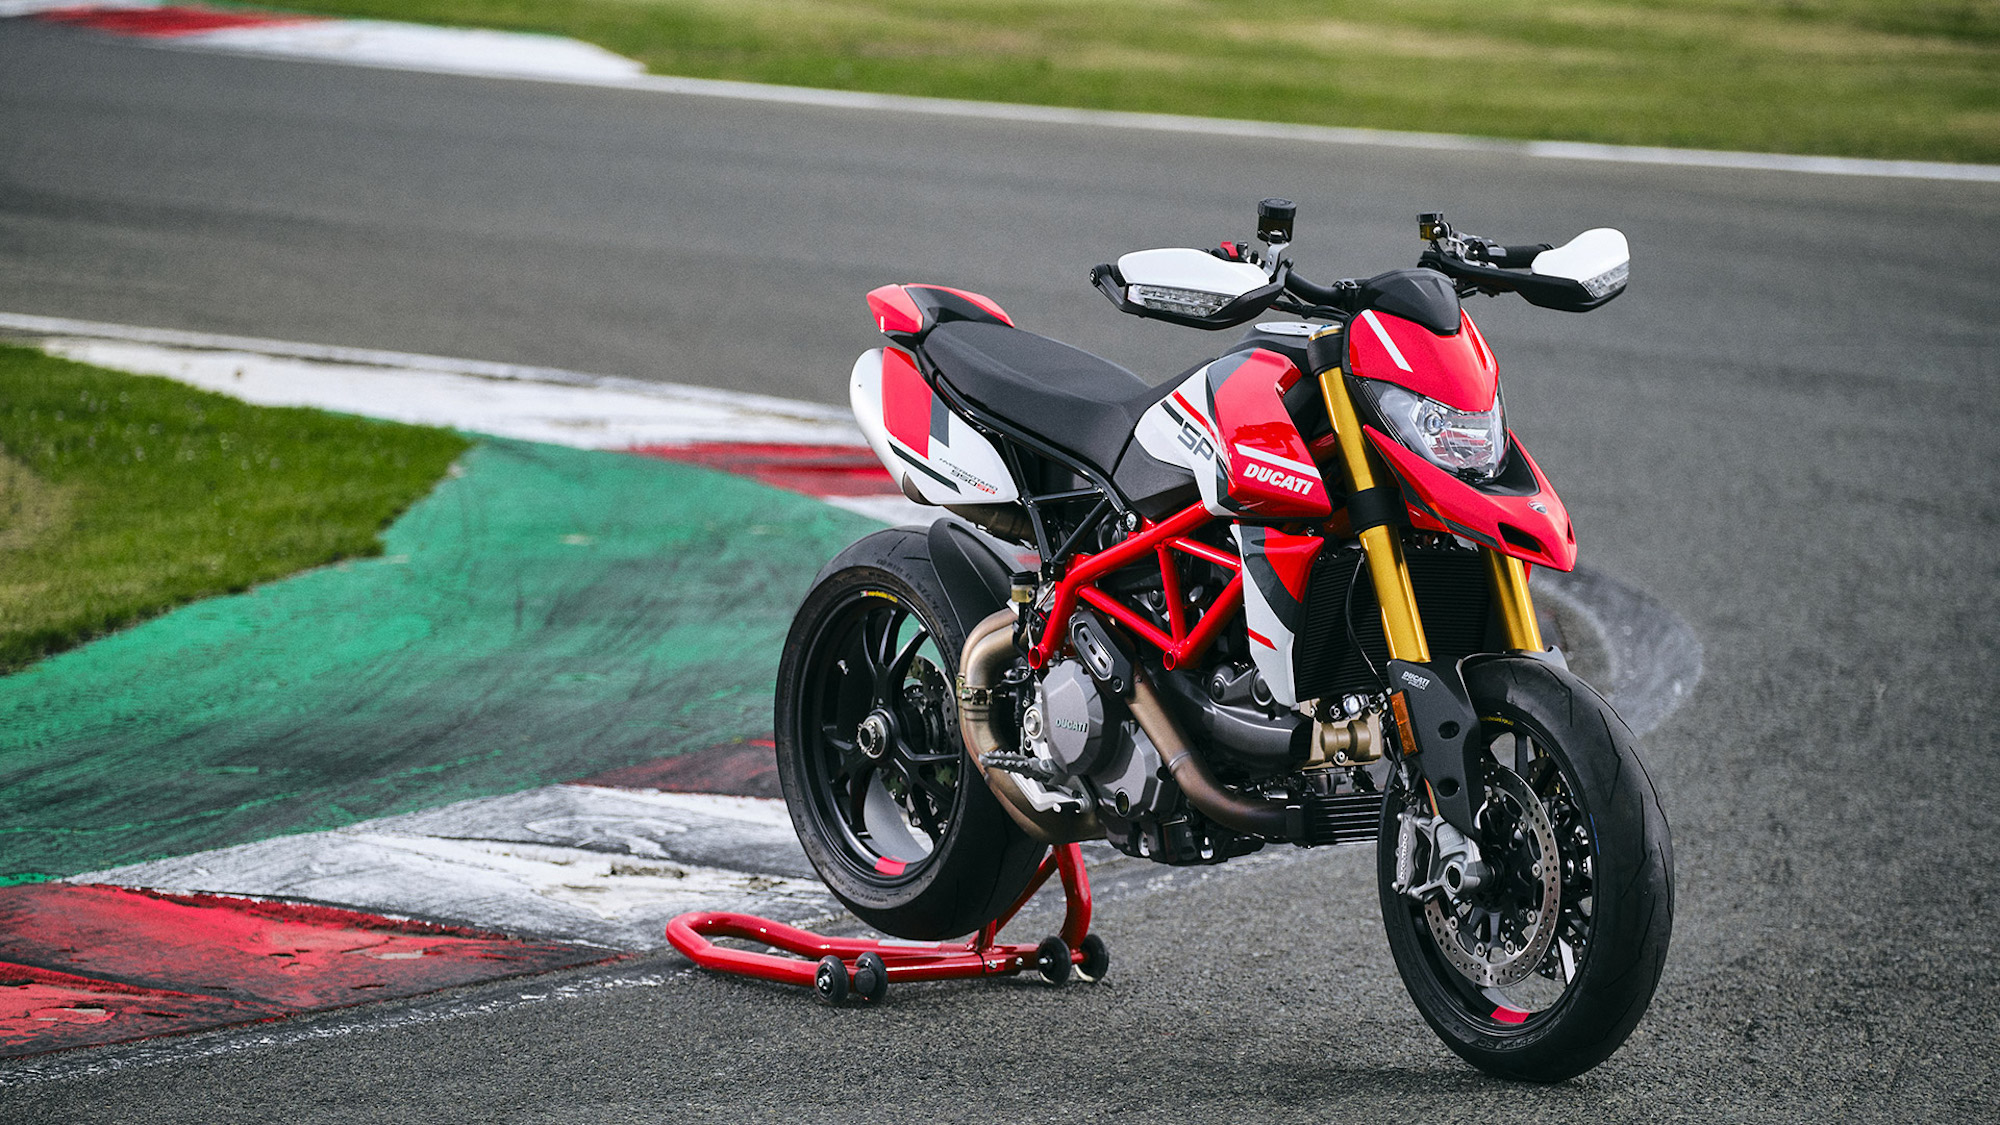 A view of Ducati's current Hypermotard. Media sourced from Ducati.